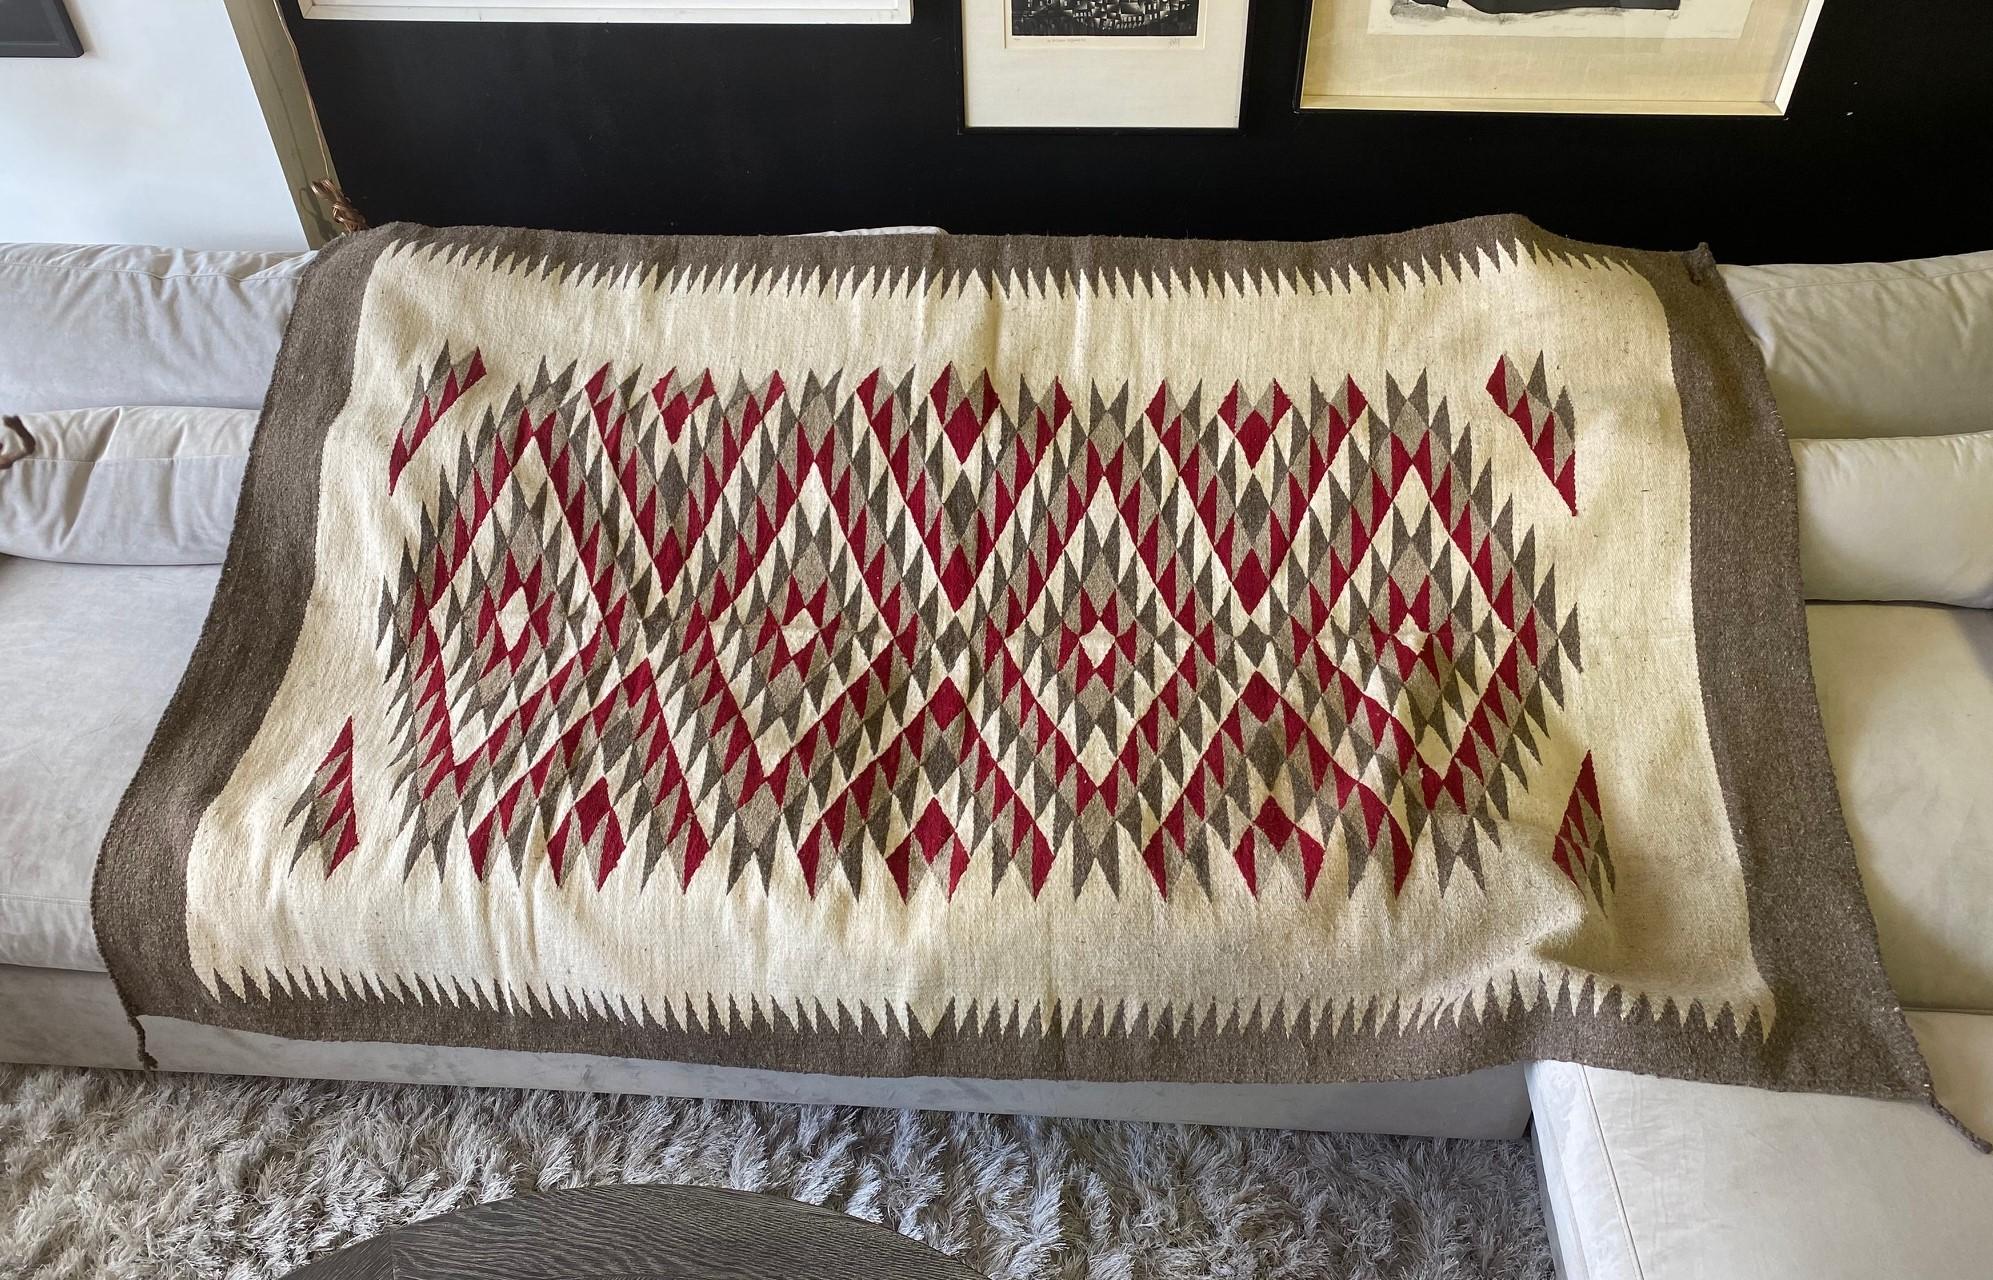 A wonderfully designed geometric patterned (of which the Navajo Tribe is famed for) blanket/rug with rich, bright colors and mesmerizing layout. Good large size. From a collection of Native American objects - pottery, blankets, rugs, etc.

Would